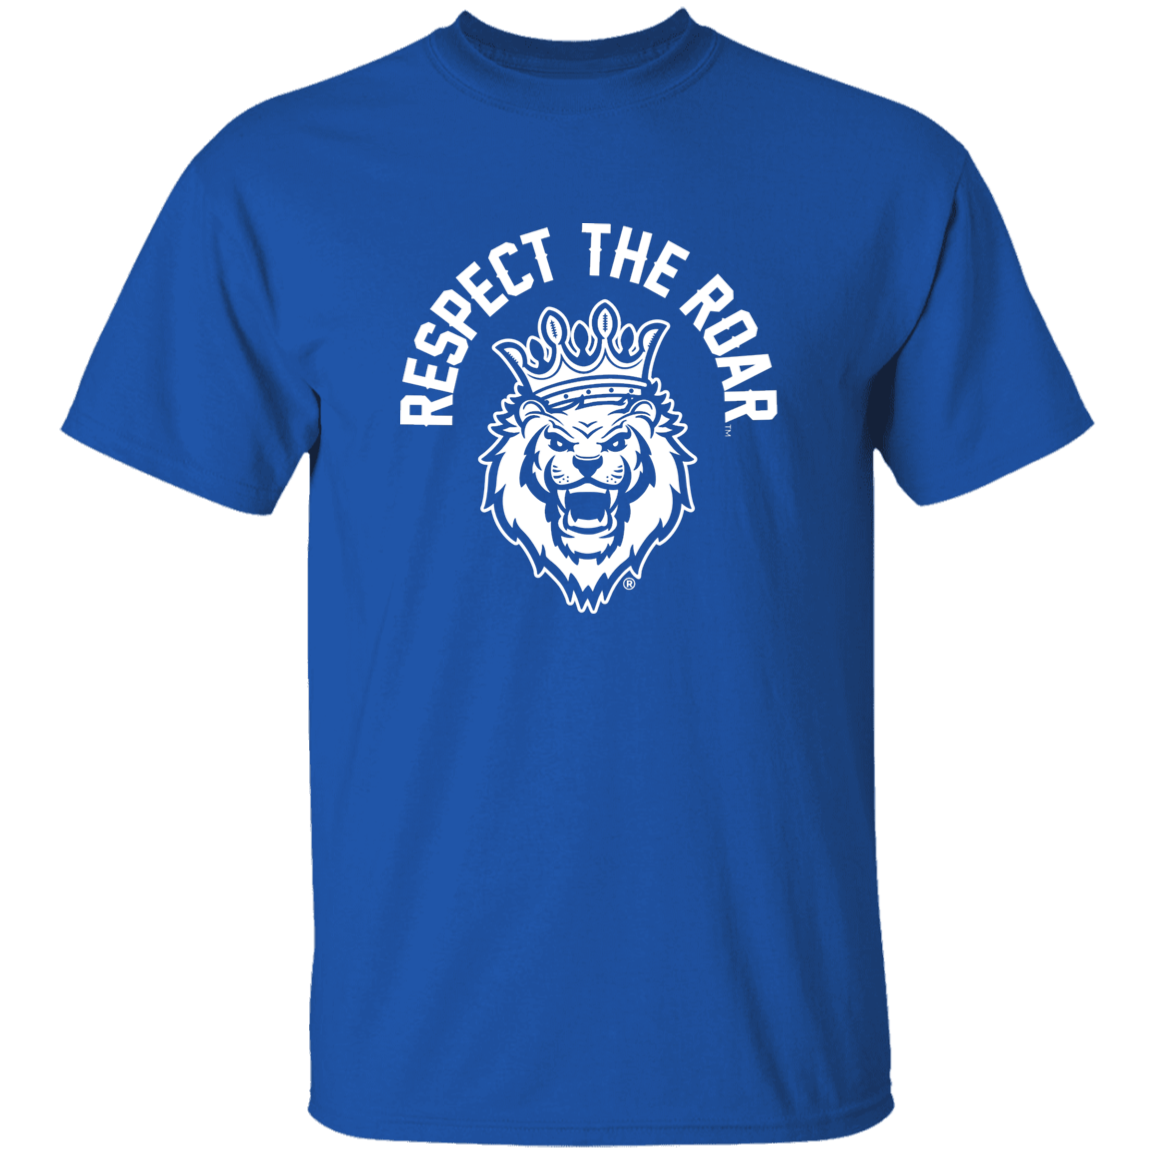 Respect The Roar® Youth T-Shirt